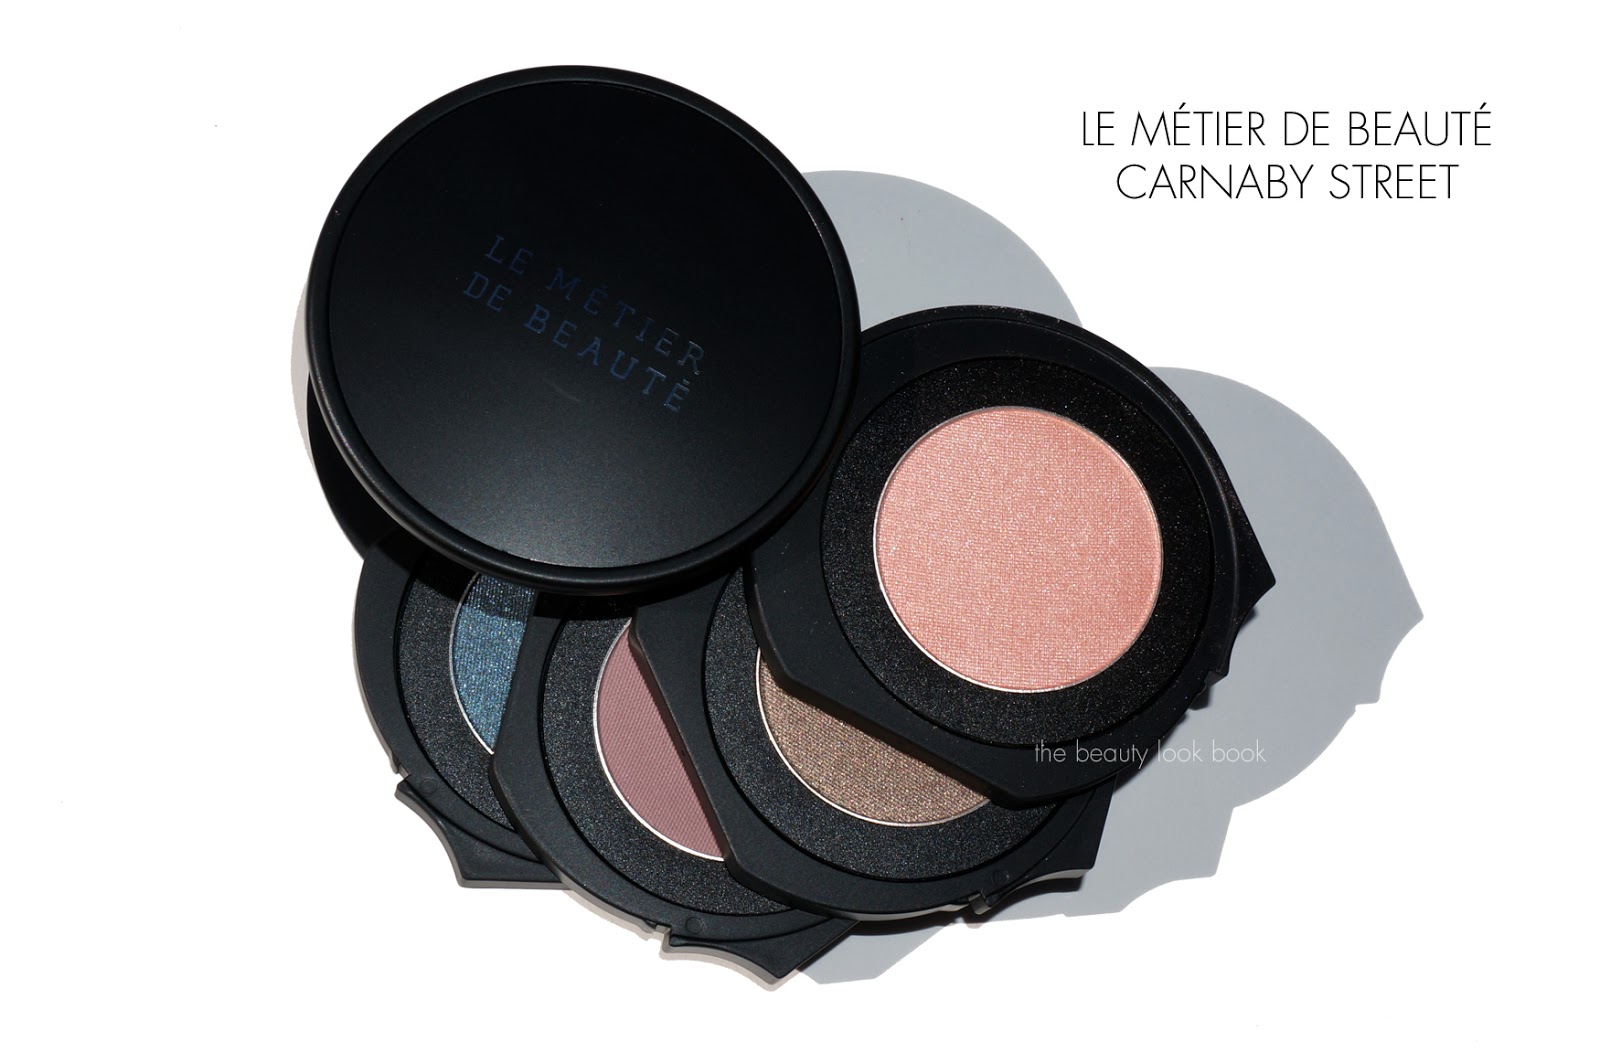 Chanel Accent #84 Powder Blush  Holiday 2013 - The Beauty Look Book